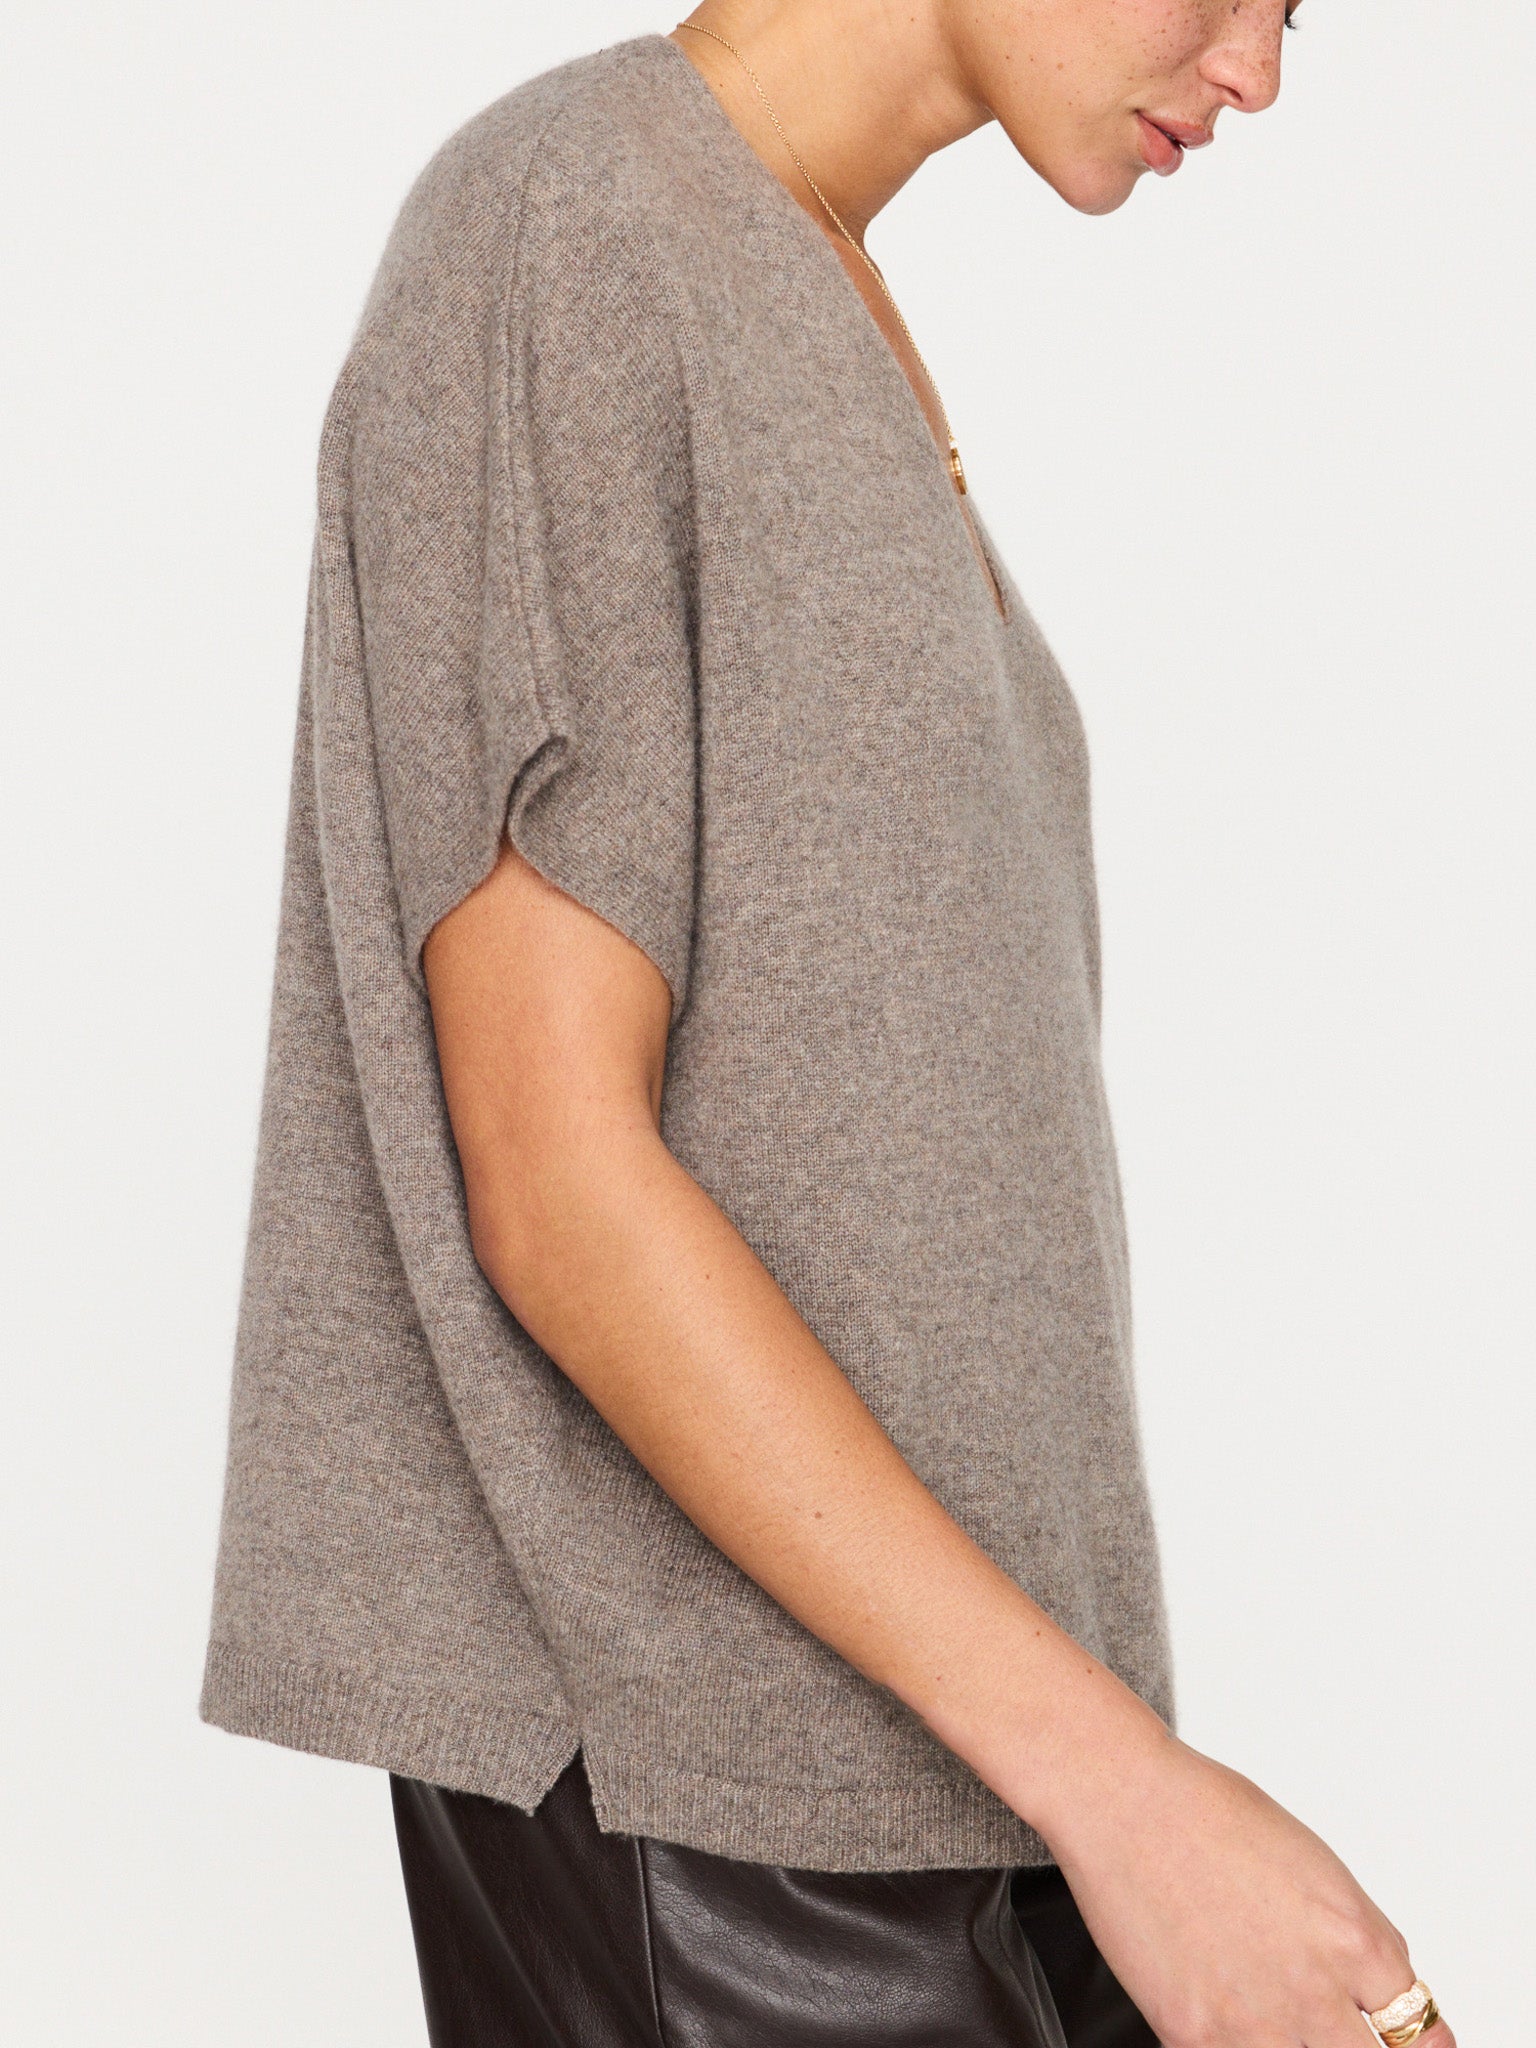 Ophi cashmere grey v-neck t-shirt top side view